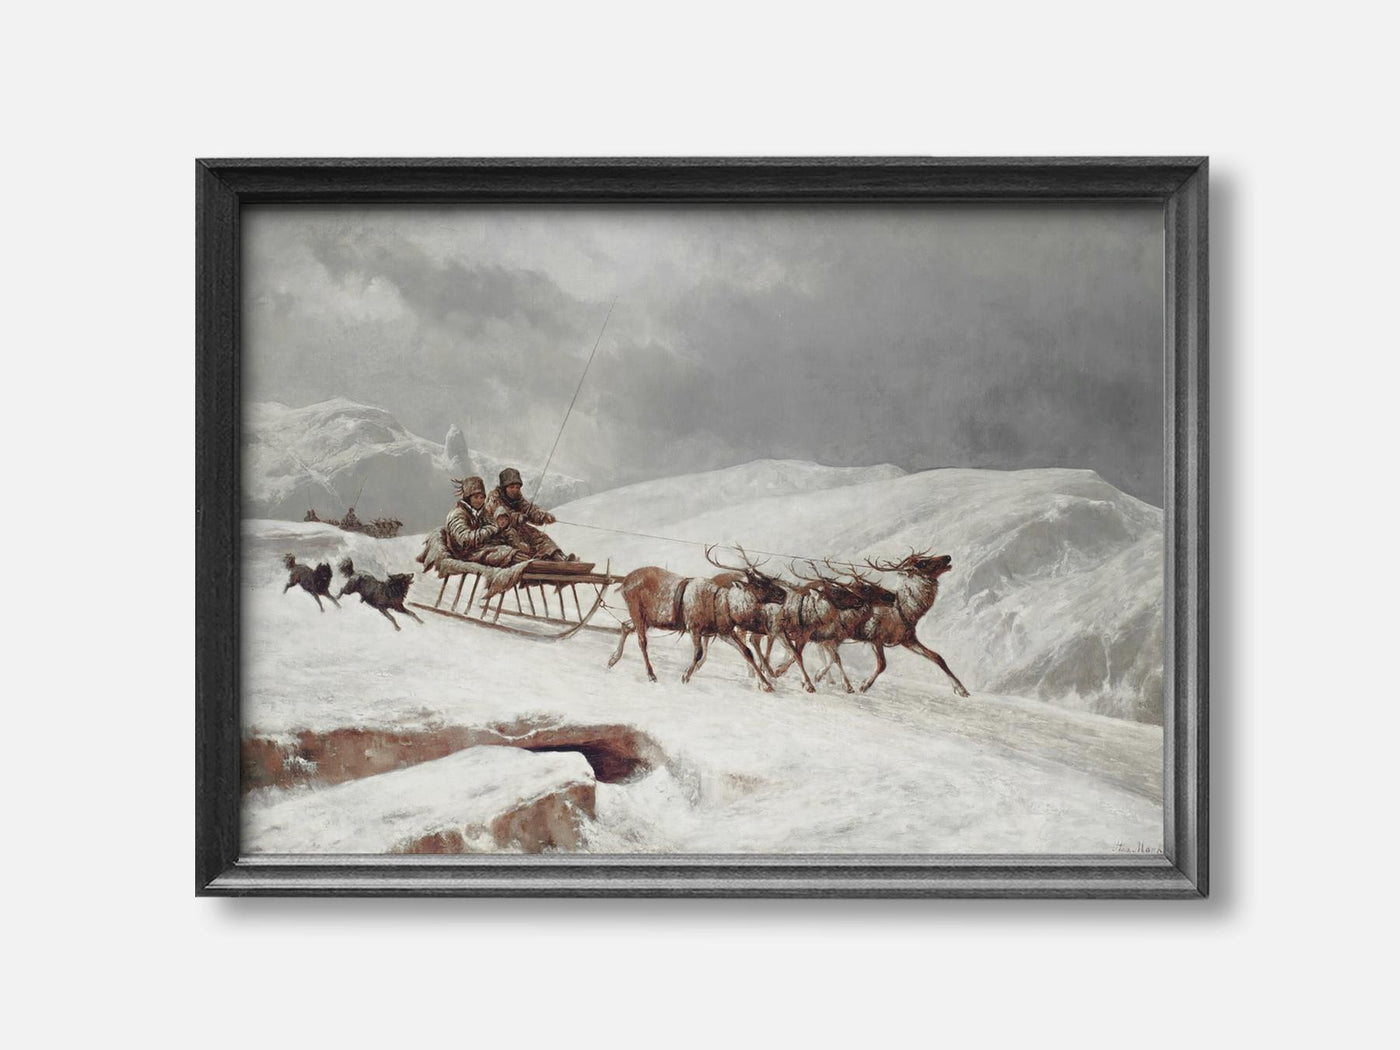 Reindeer Sleigh Ride mockup - A_w37-V1-PC_F+B-SS_1-PS_5x7-C_def variant